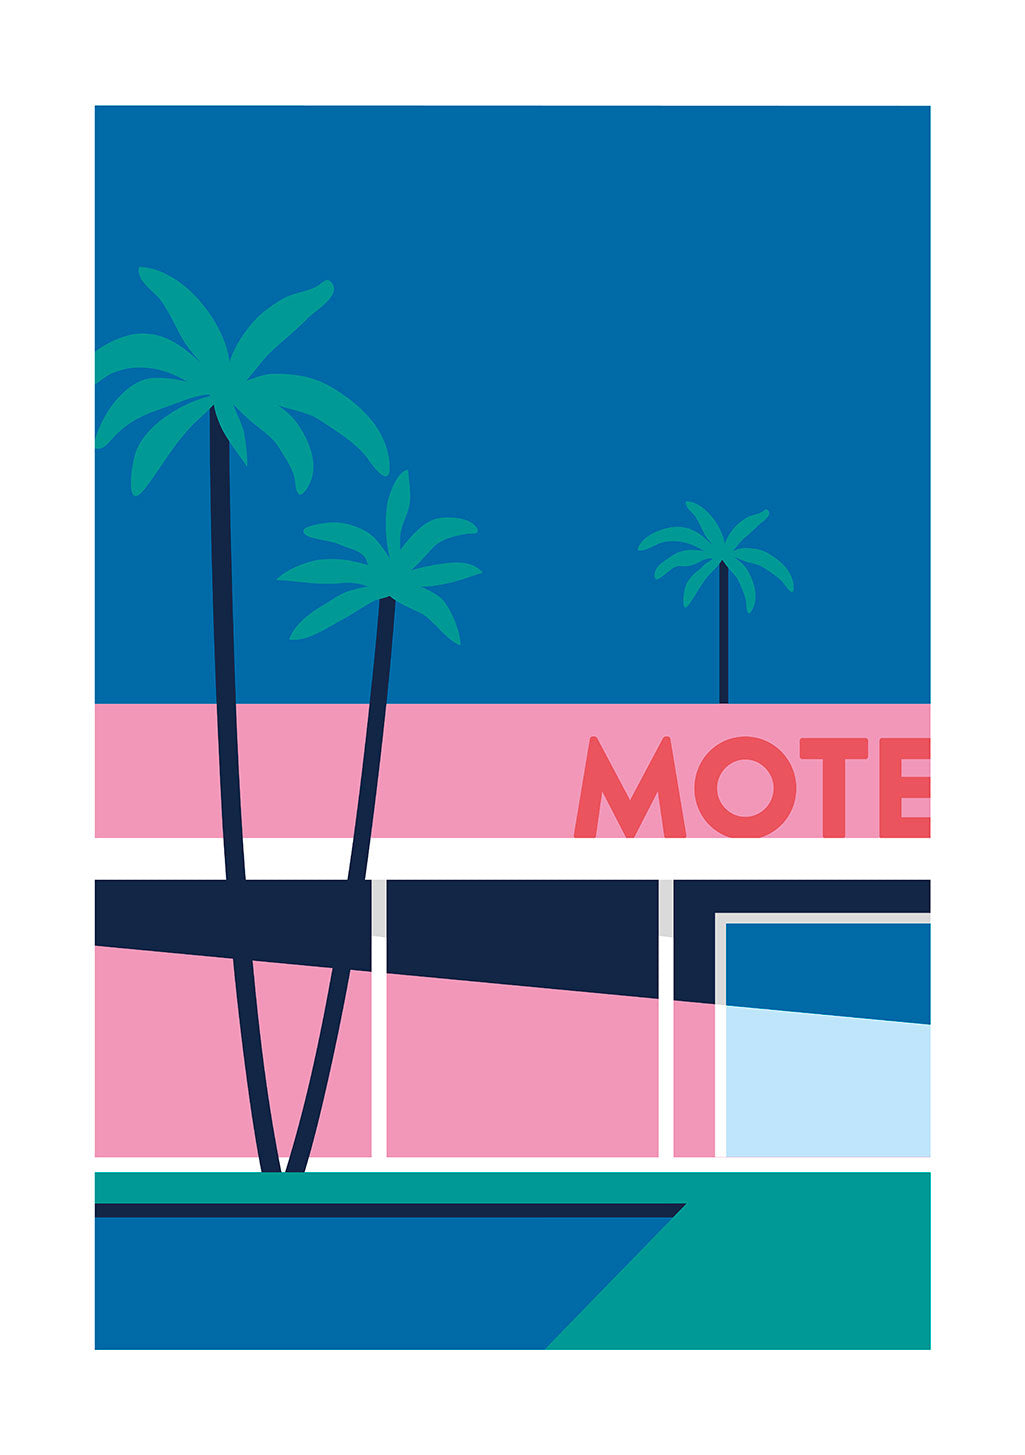 affiche-voyage-quentin-monge-palm-springs-motel-1